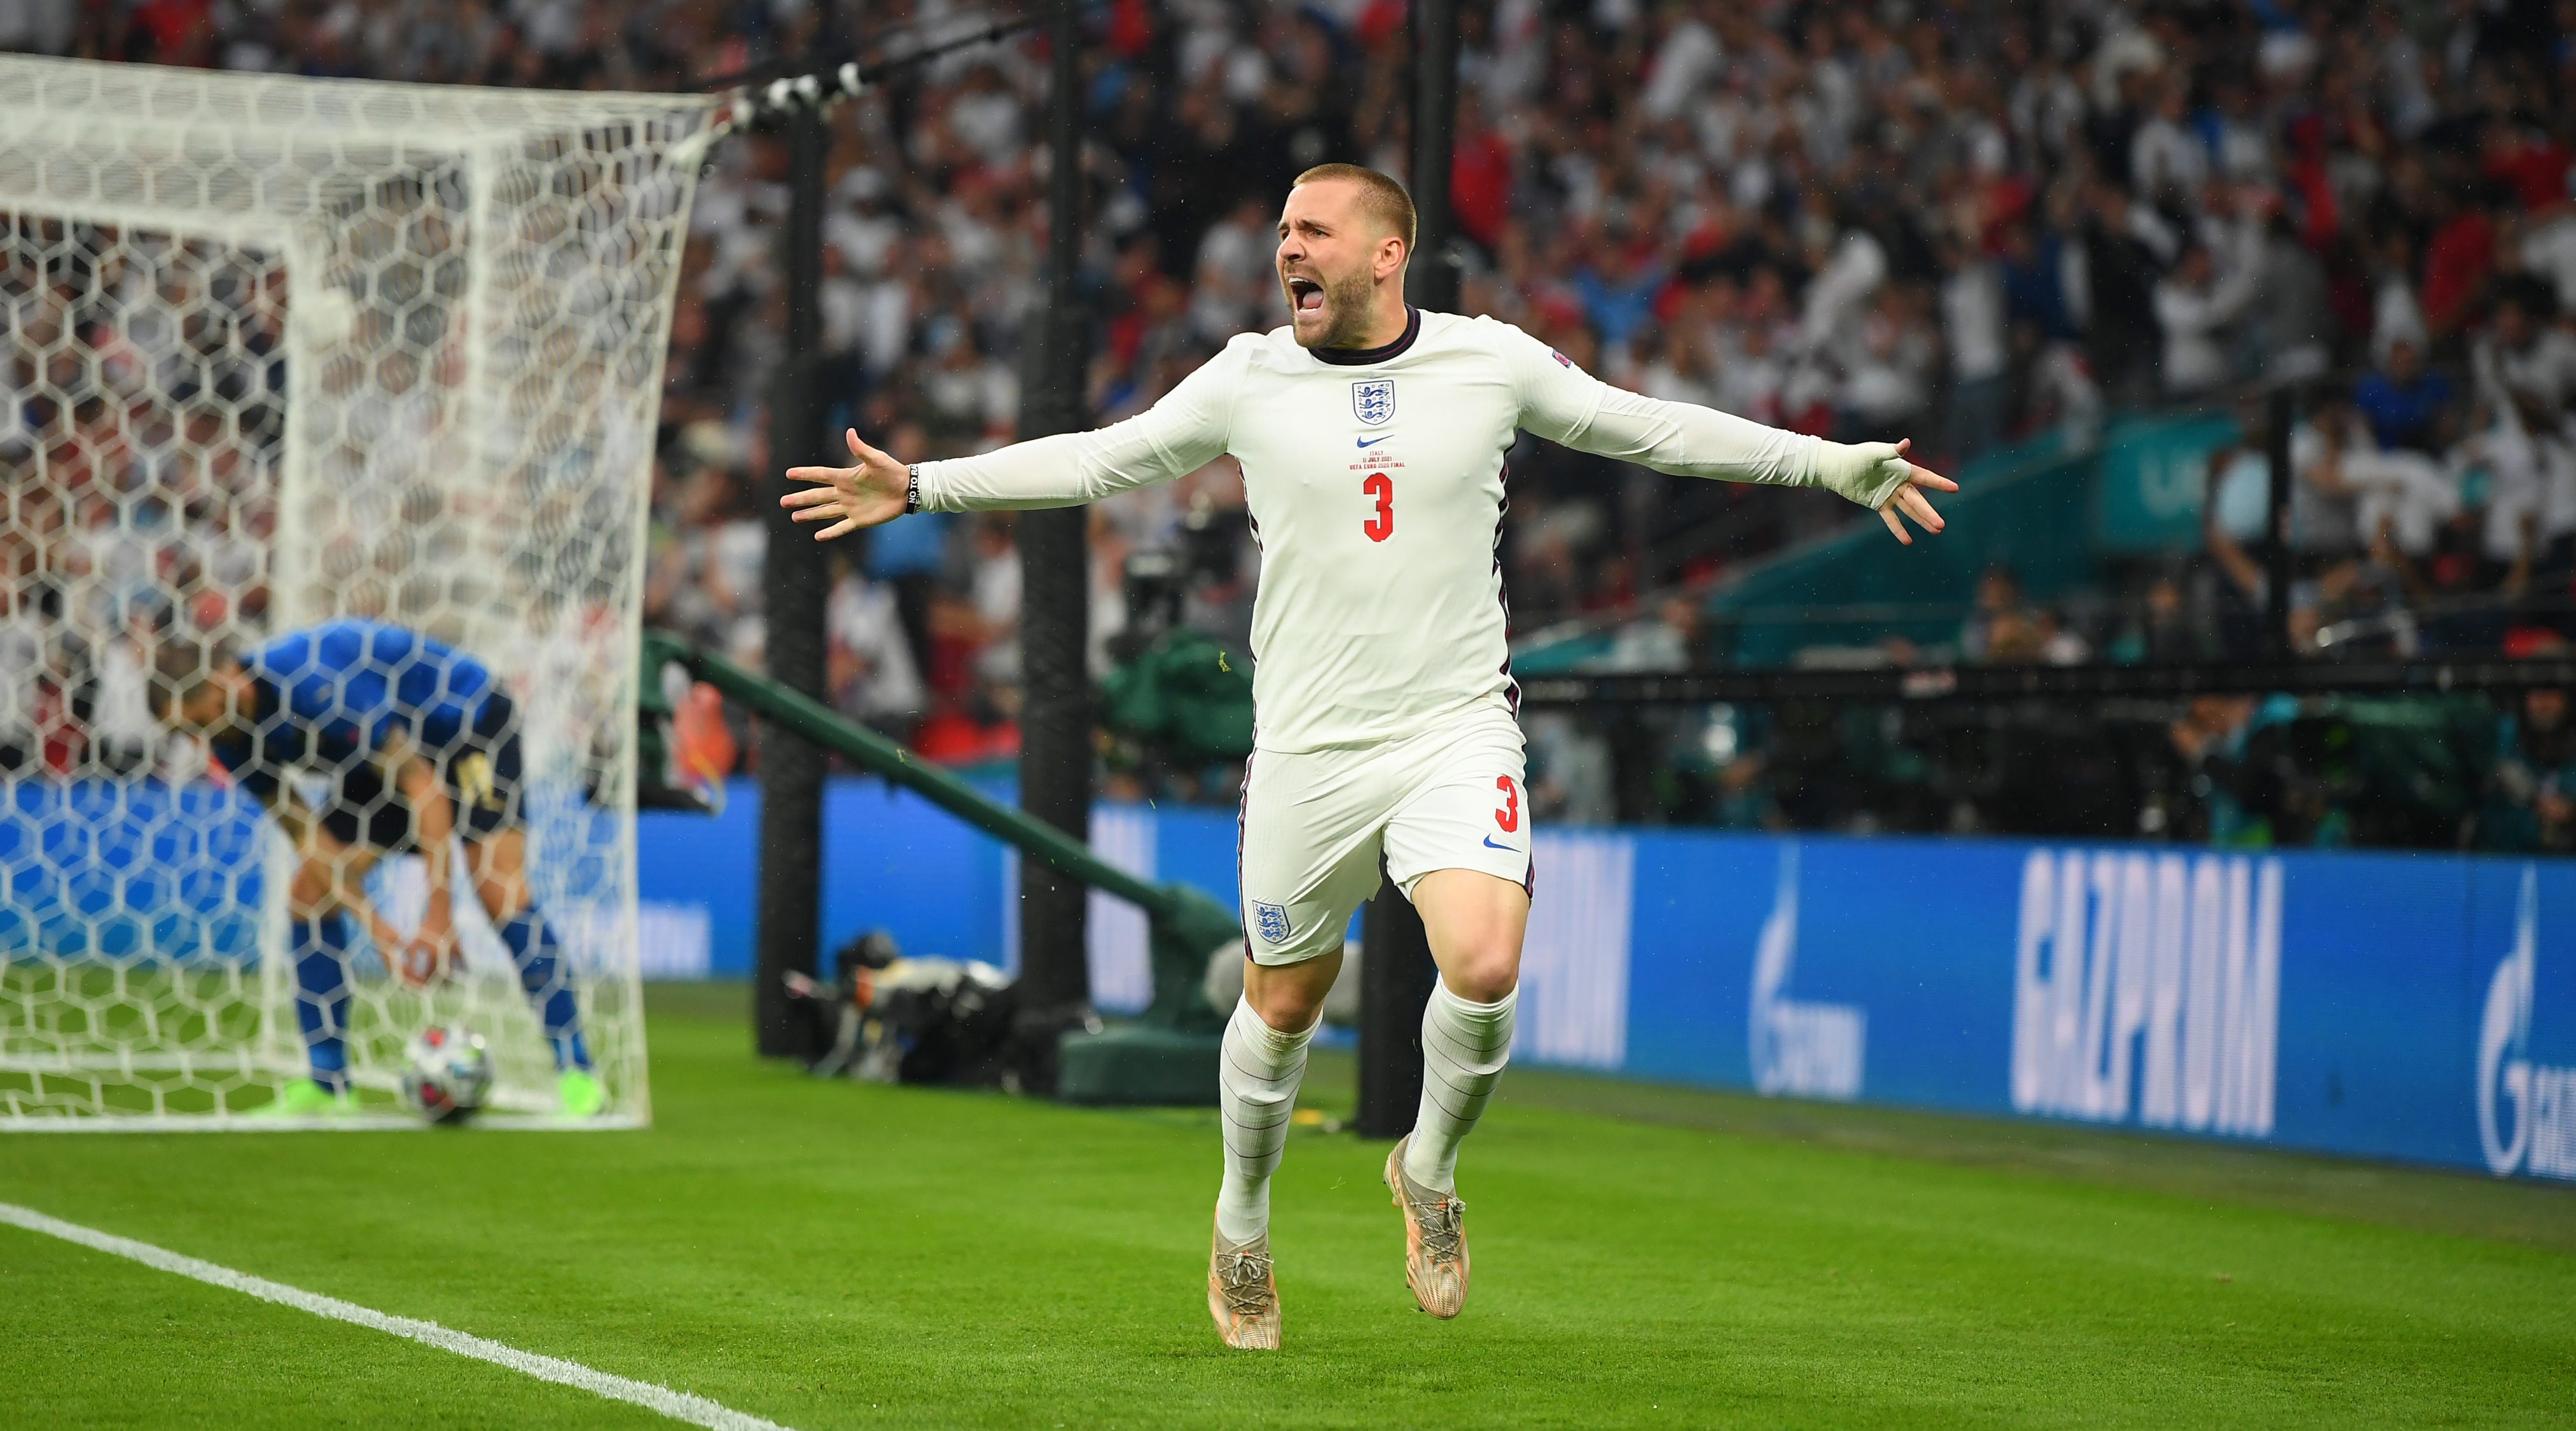 LONDON, ENGLAND - JULY 11: Luke Shaw of England celebrates scoring the first goal during the UEFA Euro 2020 Championship Final between Italy and England at Wembley Stadium on July 11, 2021 in London, England.